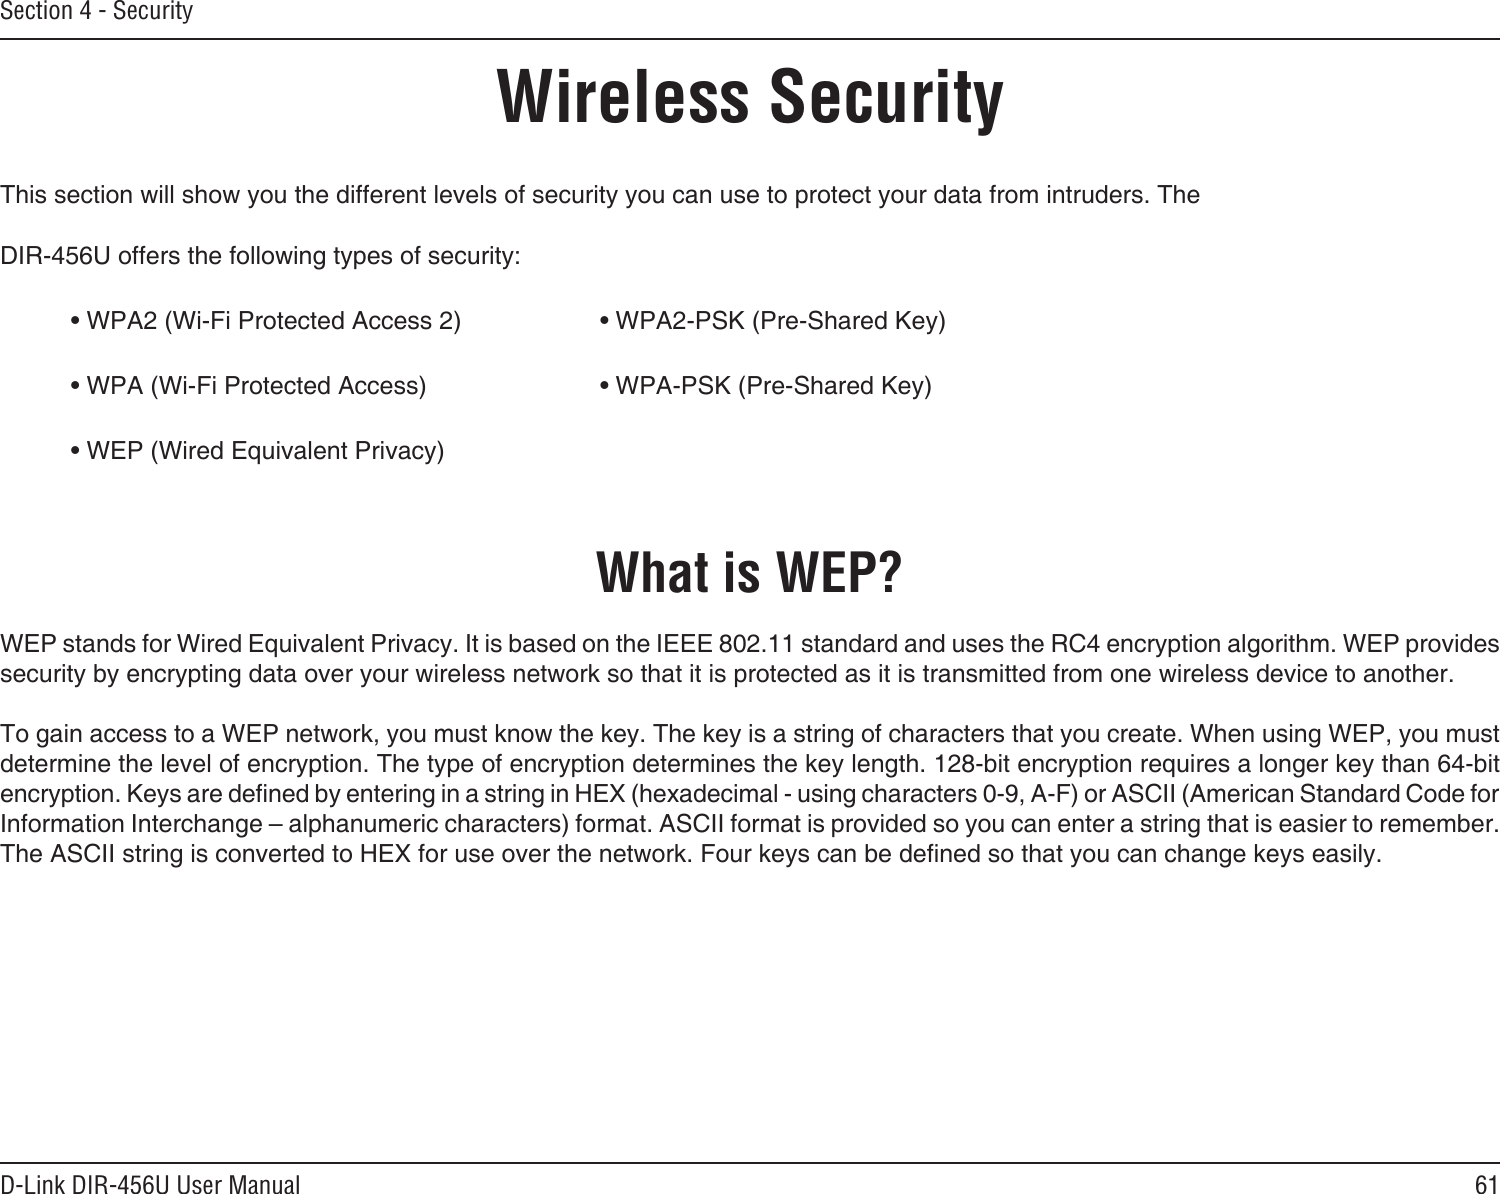 61D-Link DIR-456U User ManualSection 4 - SecurityWireless SecurityThis section will show you the different levels of security you can use to protect your data from intruders. The DIR-456U offers the following types of security:• WPA2 (Wi-Fi Protected Access 2)     • WPA2-PSK (Pre-Shared Key)• WPA (Wi-Fi Protected Access)      • WPA-PSK (Pre-Shared Key)• WEP (Wired Equivalent Privacy)What is WEP?WEP stands for Wired Equivalent Privacy. It is based on the IEEE 802.11 standard and uses the RC4 encryption algorithm. WEP provides security by encrypting data over your wireless network so that it is protected as it is transmitted from one wireless device to another.To gain access to a WEP network, you must know the key. The key is a string of characters that you create. When using WEP, you must determine the level of encryption. The type of encryption determines the key length. 128-bit encryption requires a longer key than 64-bit encryption. Keys are dened by entering in a string in HEX (hexadecimal - using characters 0-9, A-F) or ASCII (American Standard Code for Information Interchange – alphanumeric characters) format. ASCII format is provided so you can enter a string that is easier to remember. The ASCII string is converted to HEX for use over the network. Four keys can be dened so that you can change keys easily.